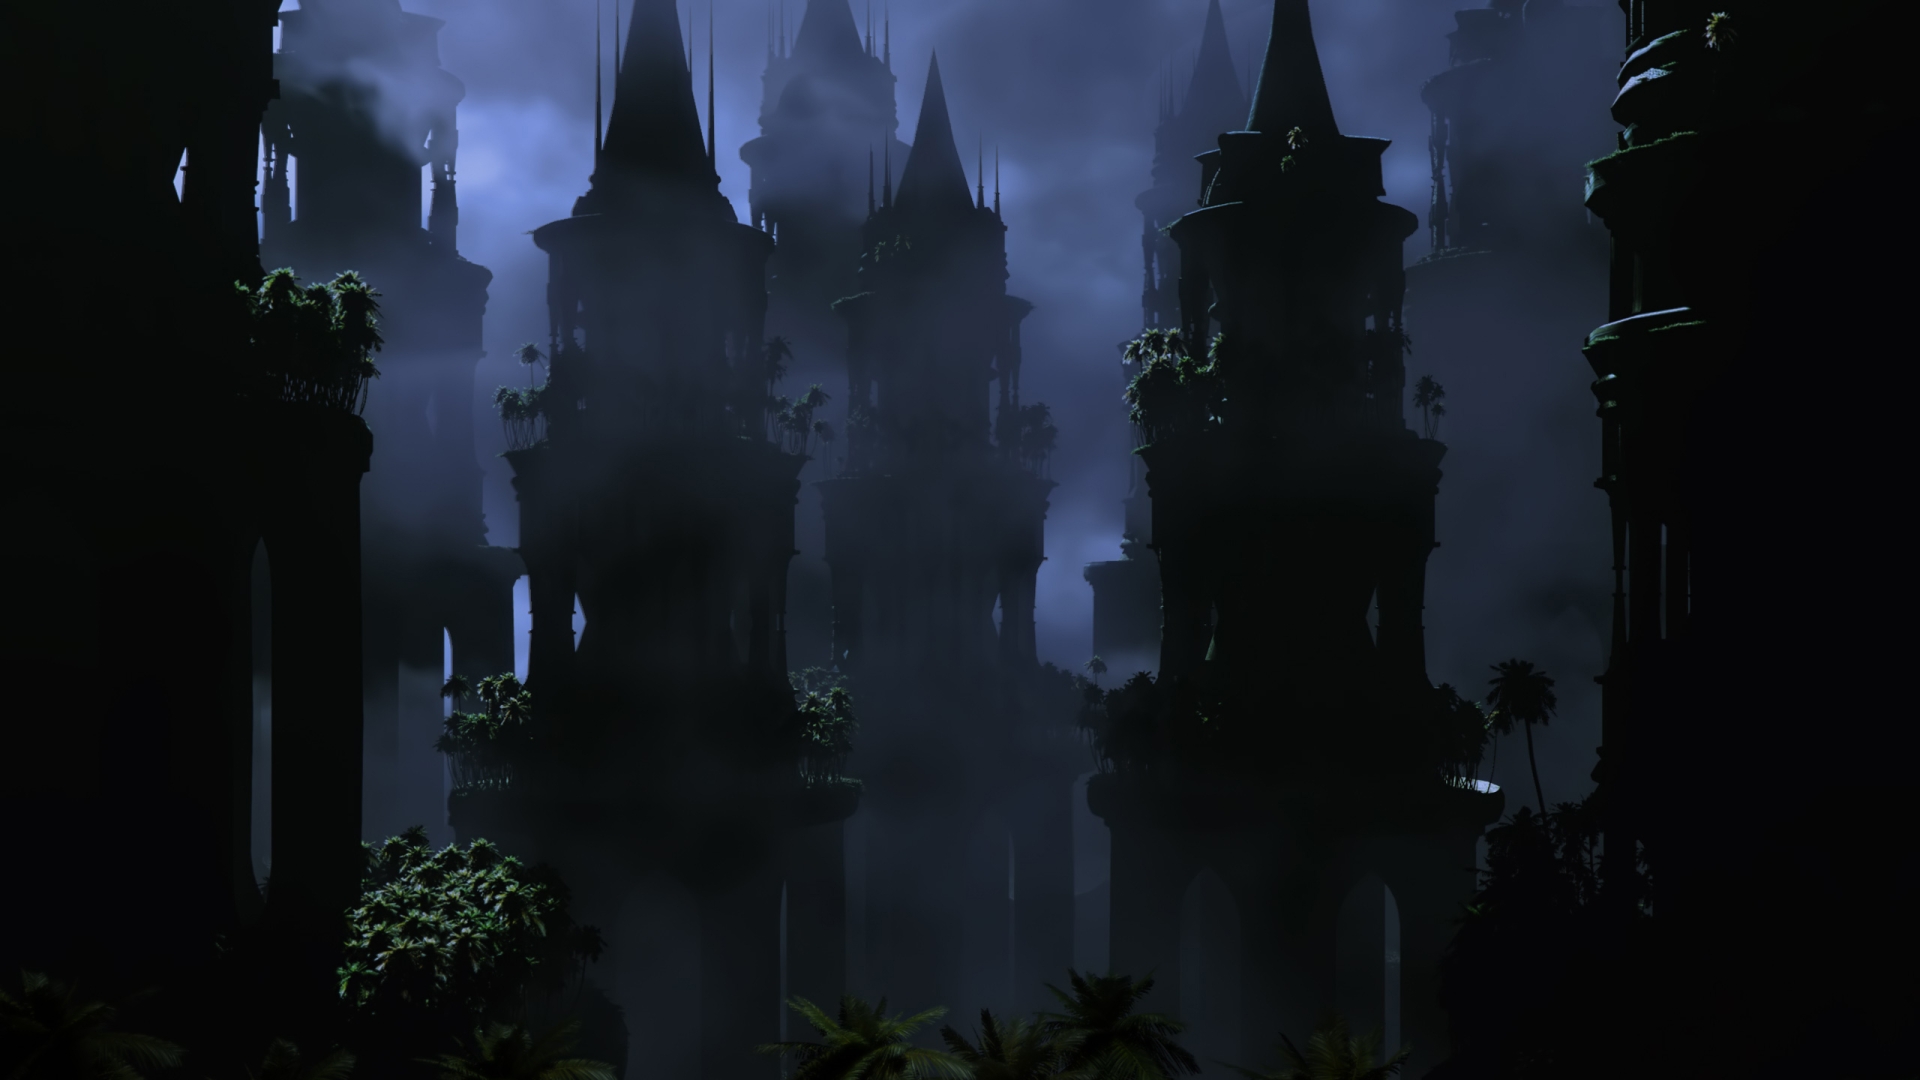 Matching Wallpaper Of The Tower In Dark Trees